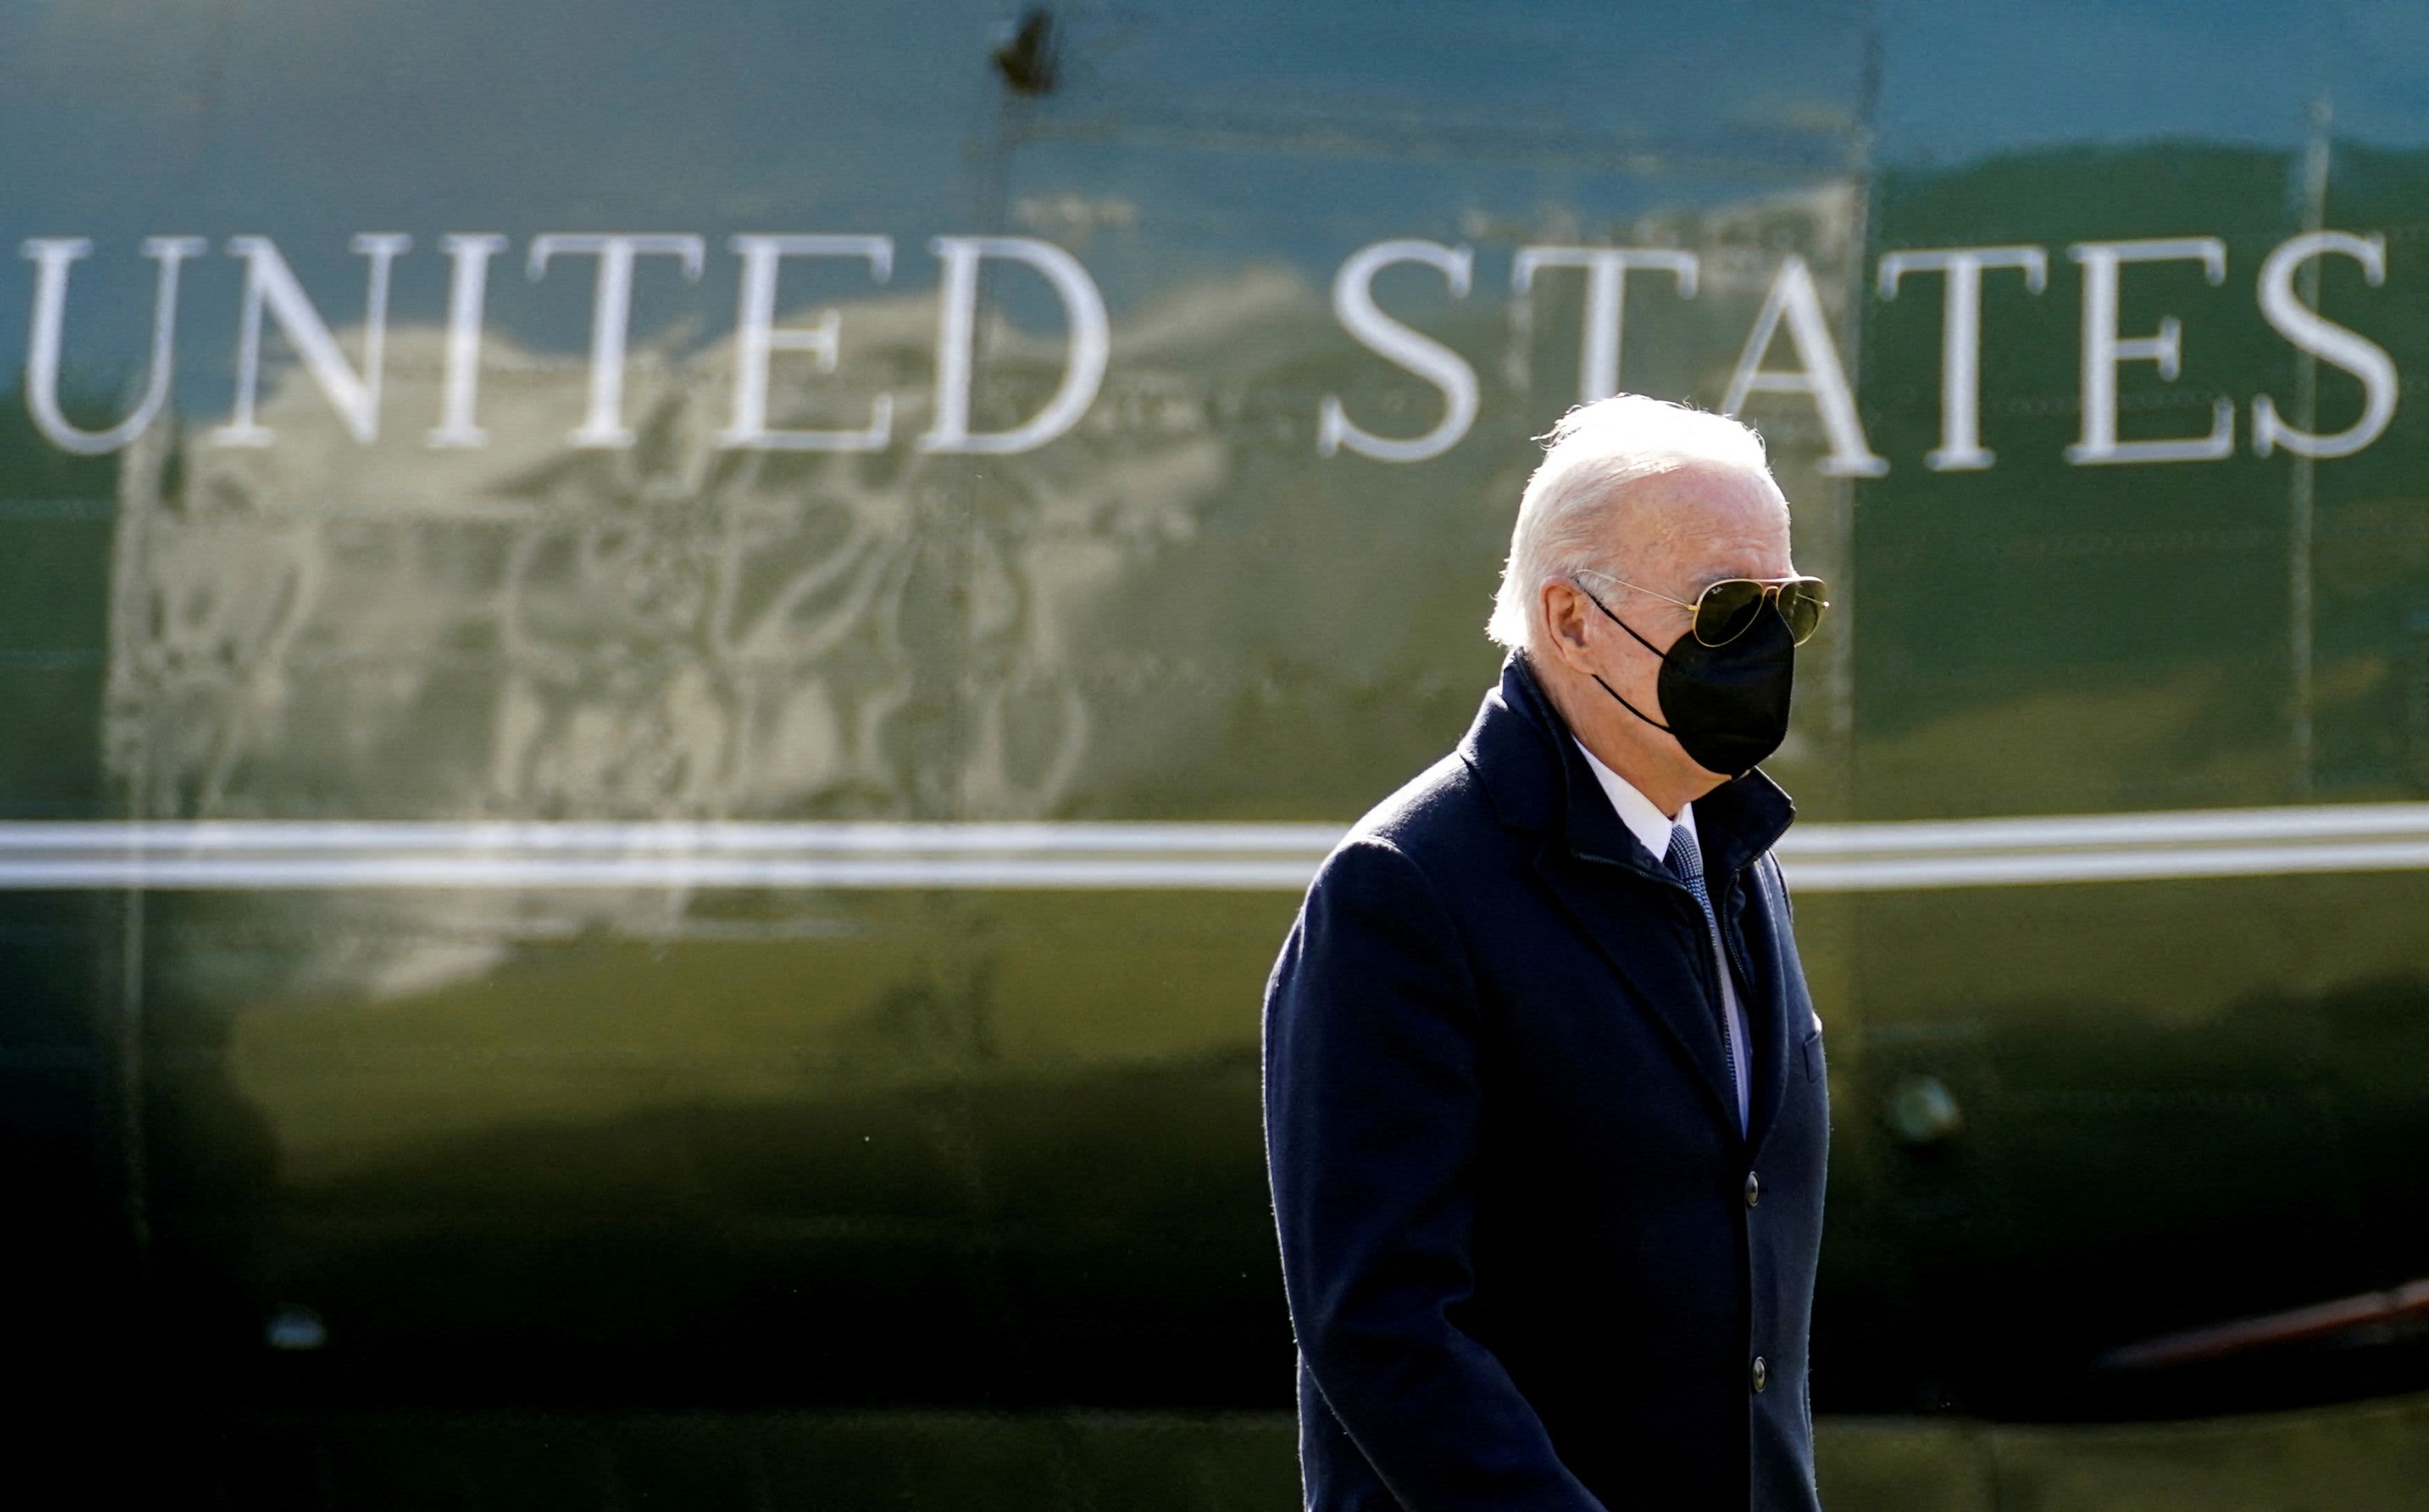 Biden's leadership on Russia will be a bright spot in a gloomy State of the Union